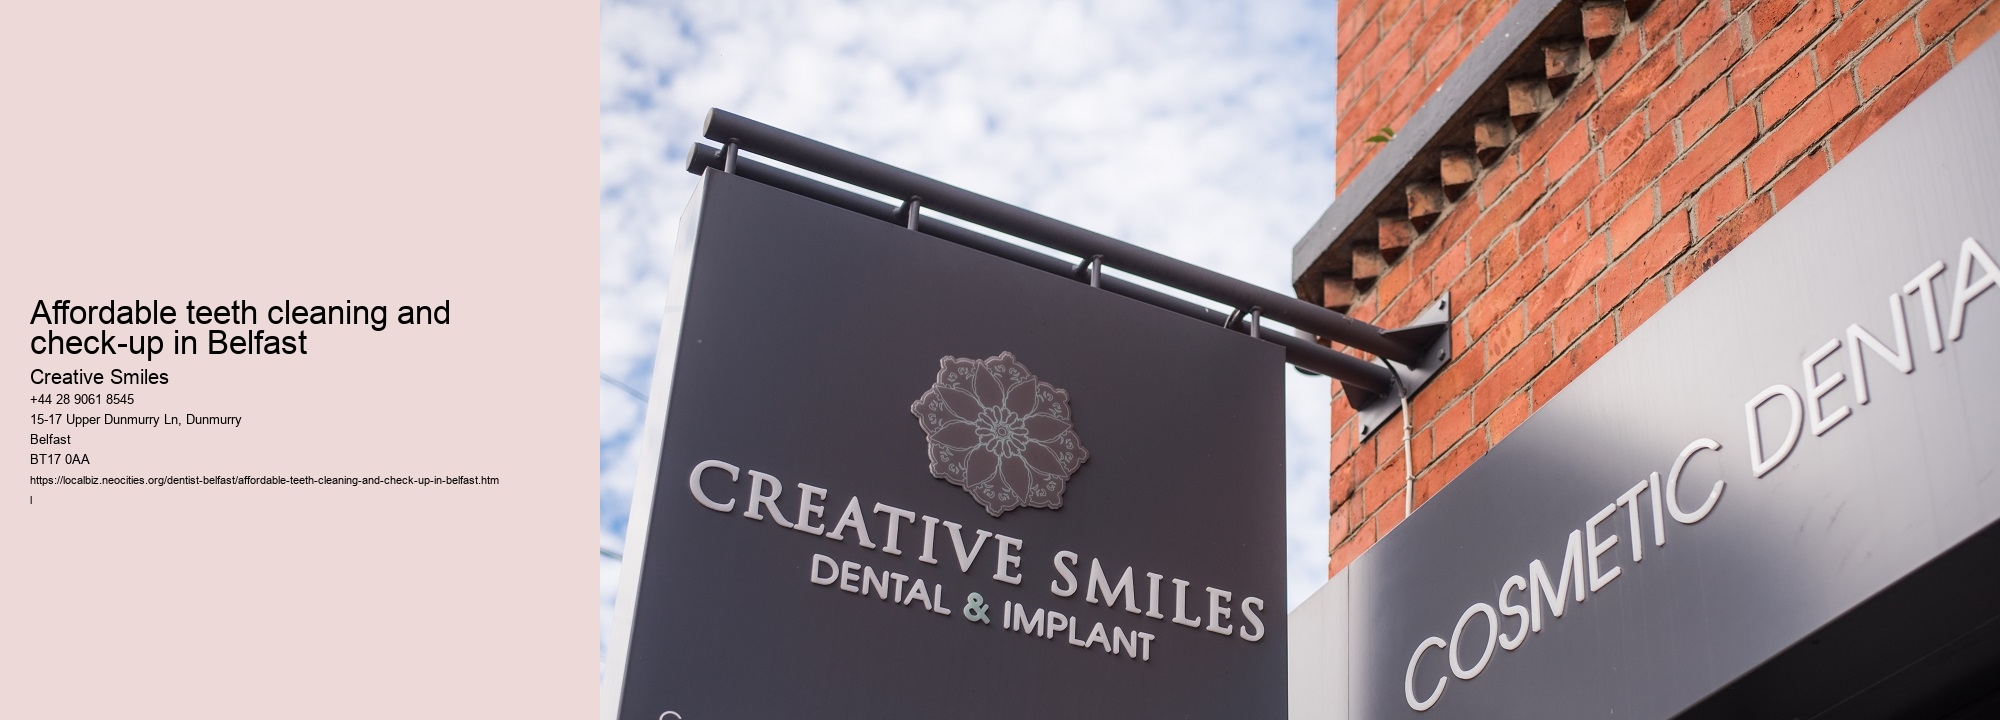 Affordable teeth cleaning and check-up in Belfast